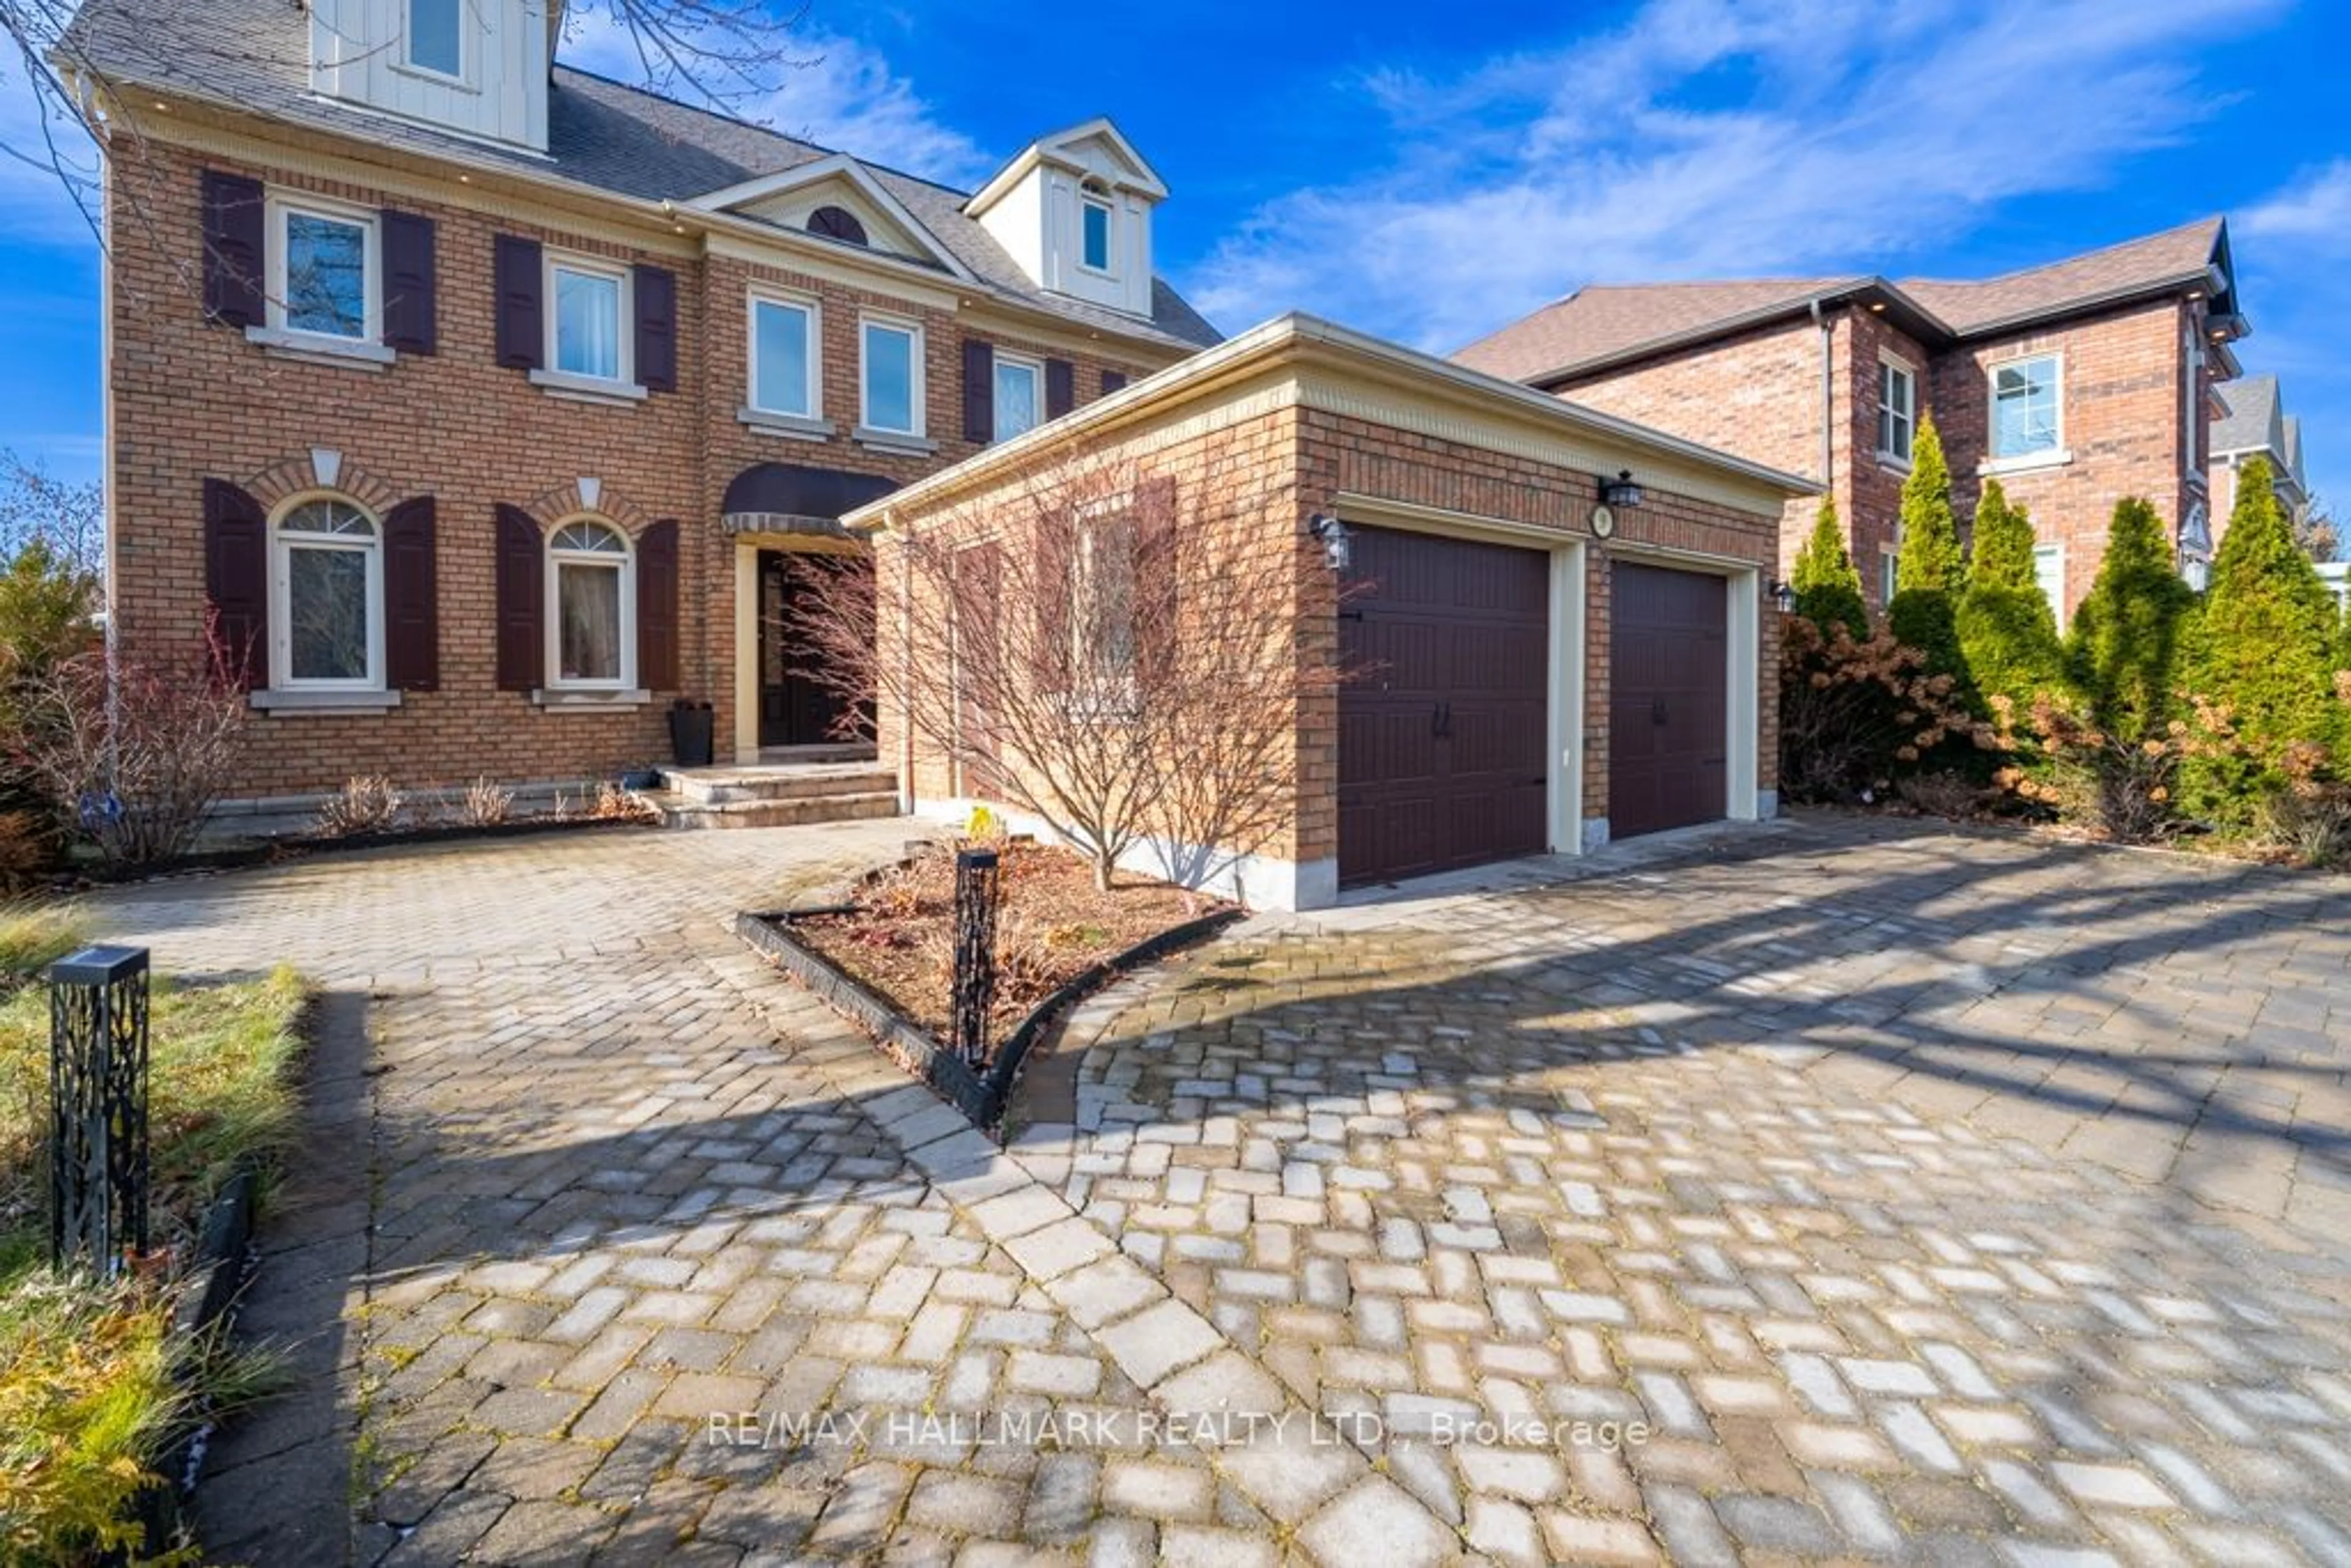 Home with brick exterior material for 59 Oatlands Cres, Richmond Hill Ontario L4C 9P2